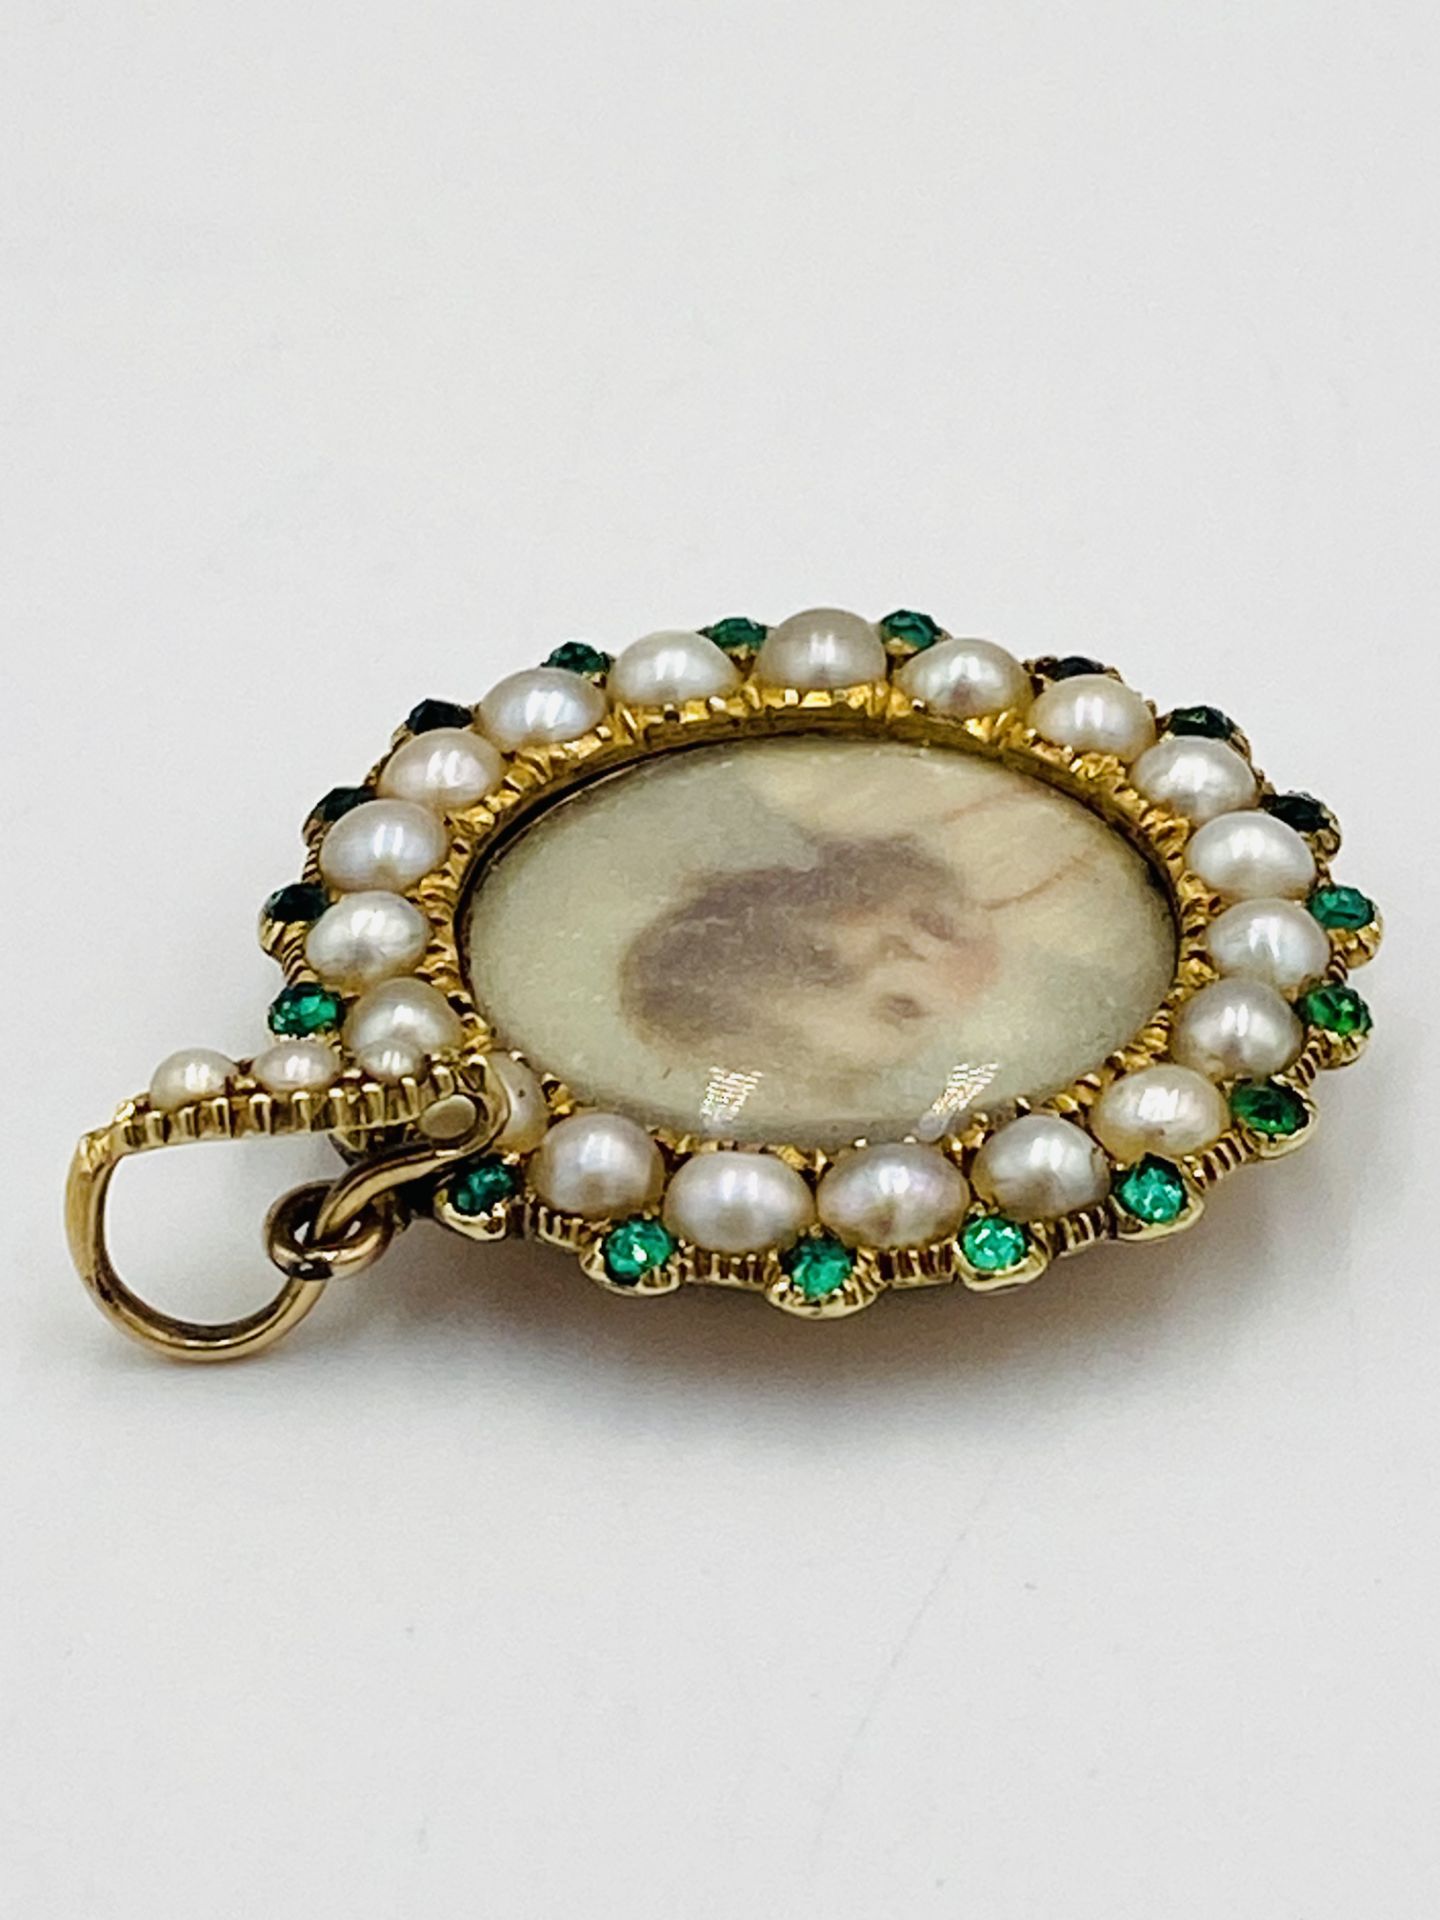 Portrait pendant with pearl and emerald surround - Image 3 of 4